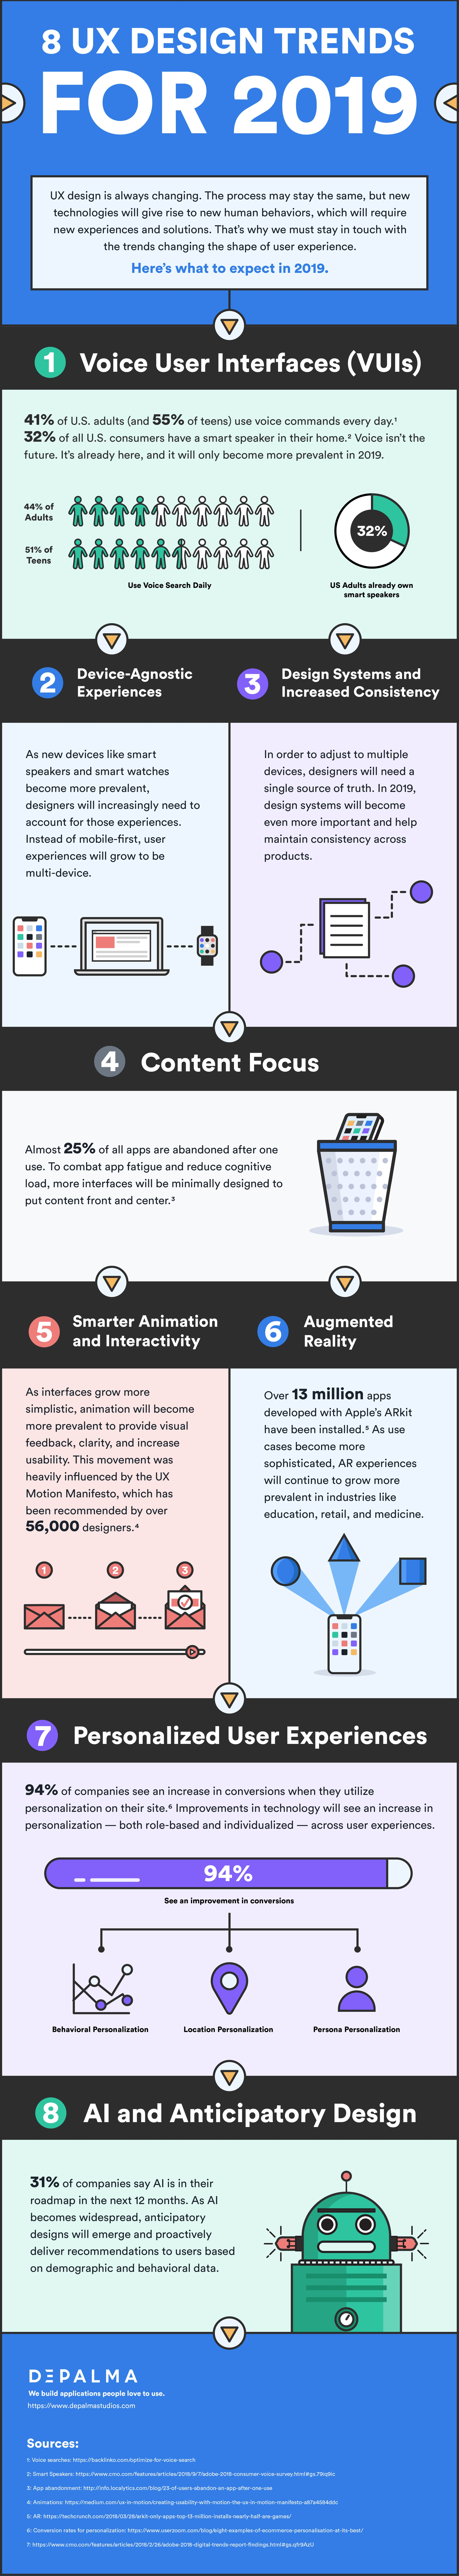 UX trends for 2019 infographic